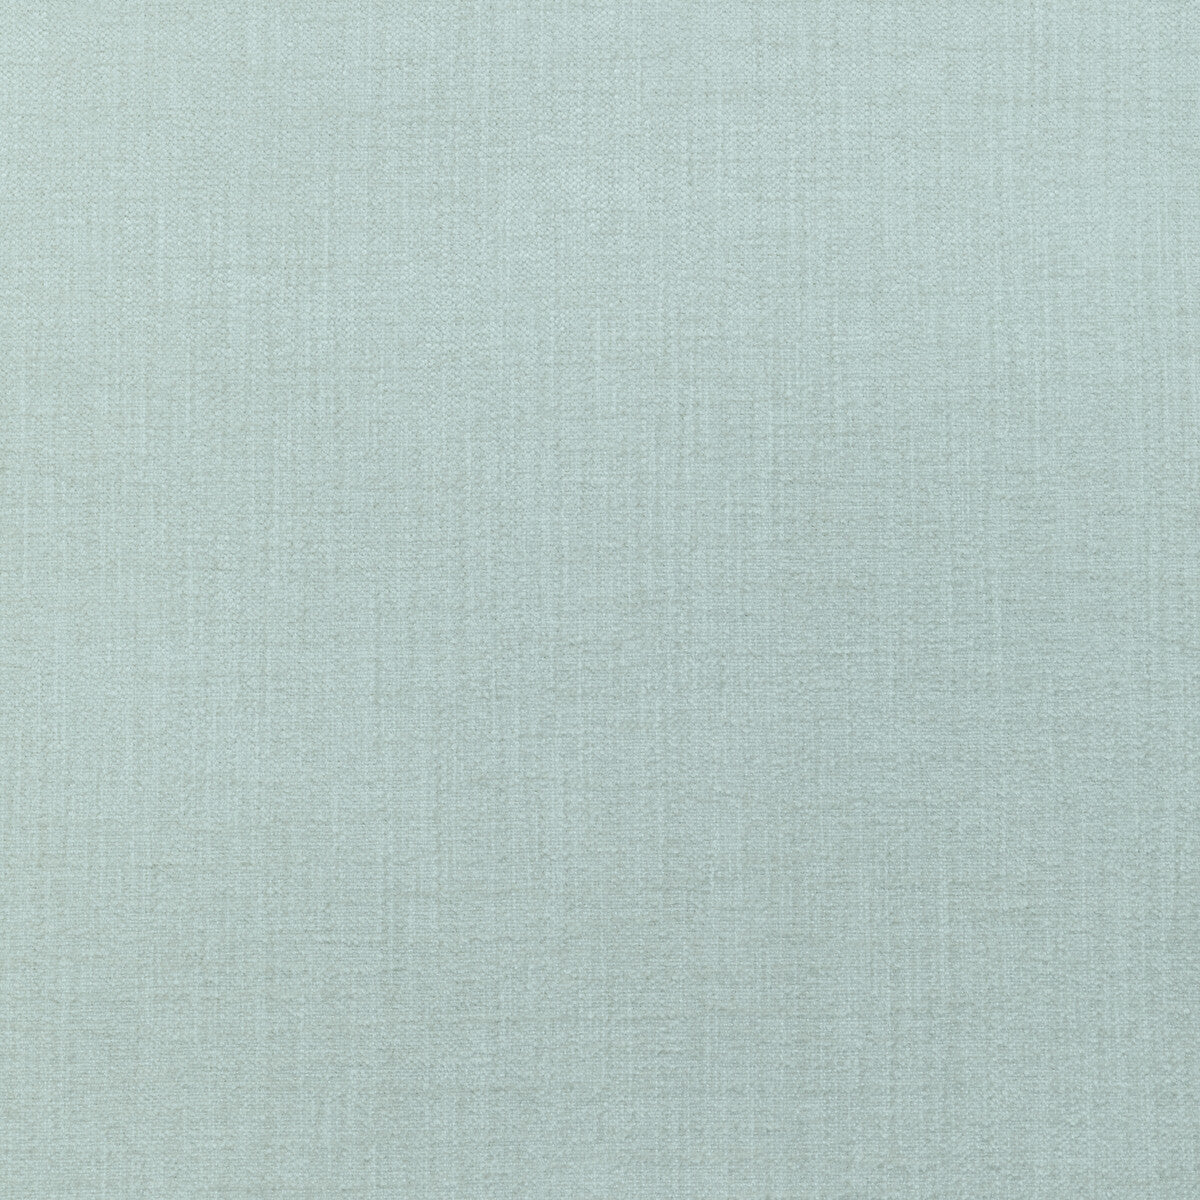 Accommodate fabric in arctic color - pattern 36255.113.0 - by Kravet Contract in the Supreen collection